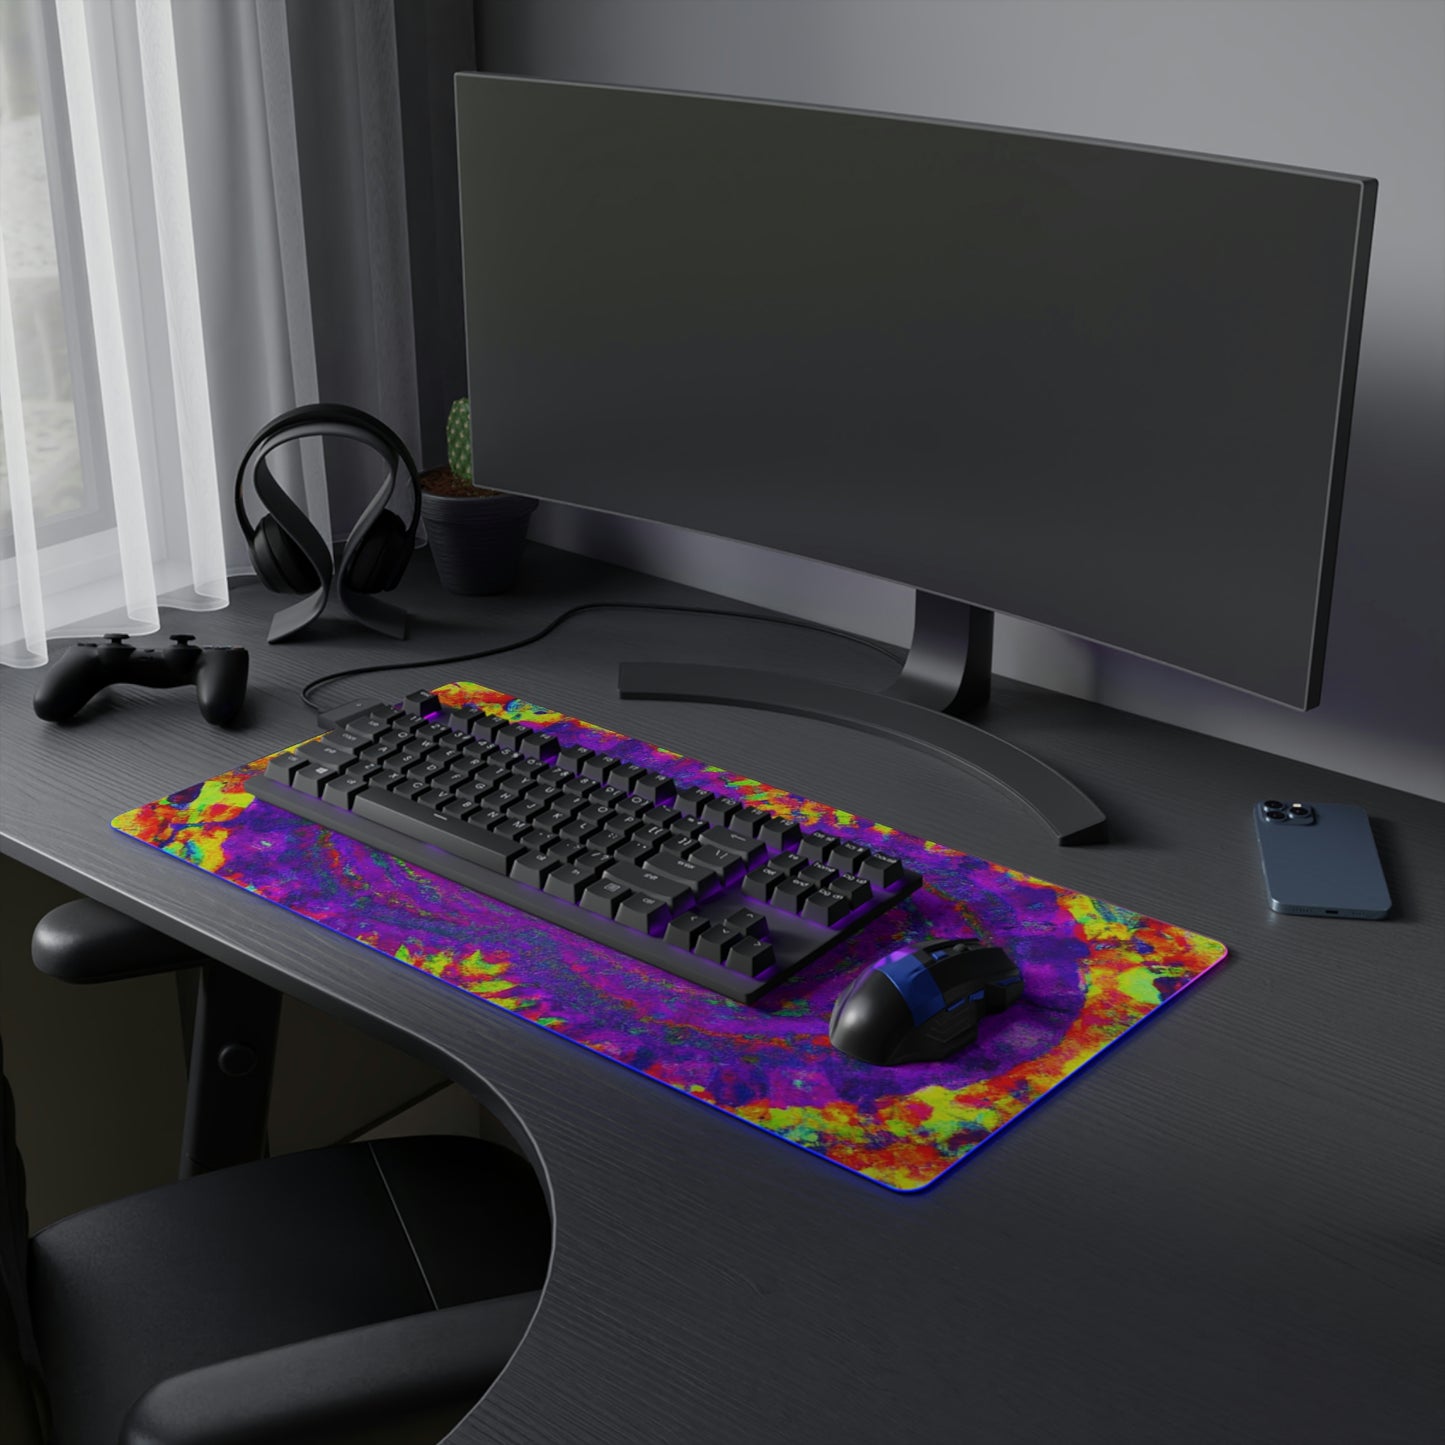 Sparky the Super Robot! - Psychedelic Trippy LED Light Up Gaming Mouse Pad